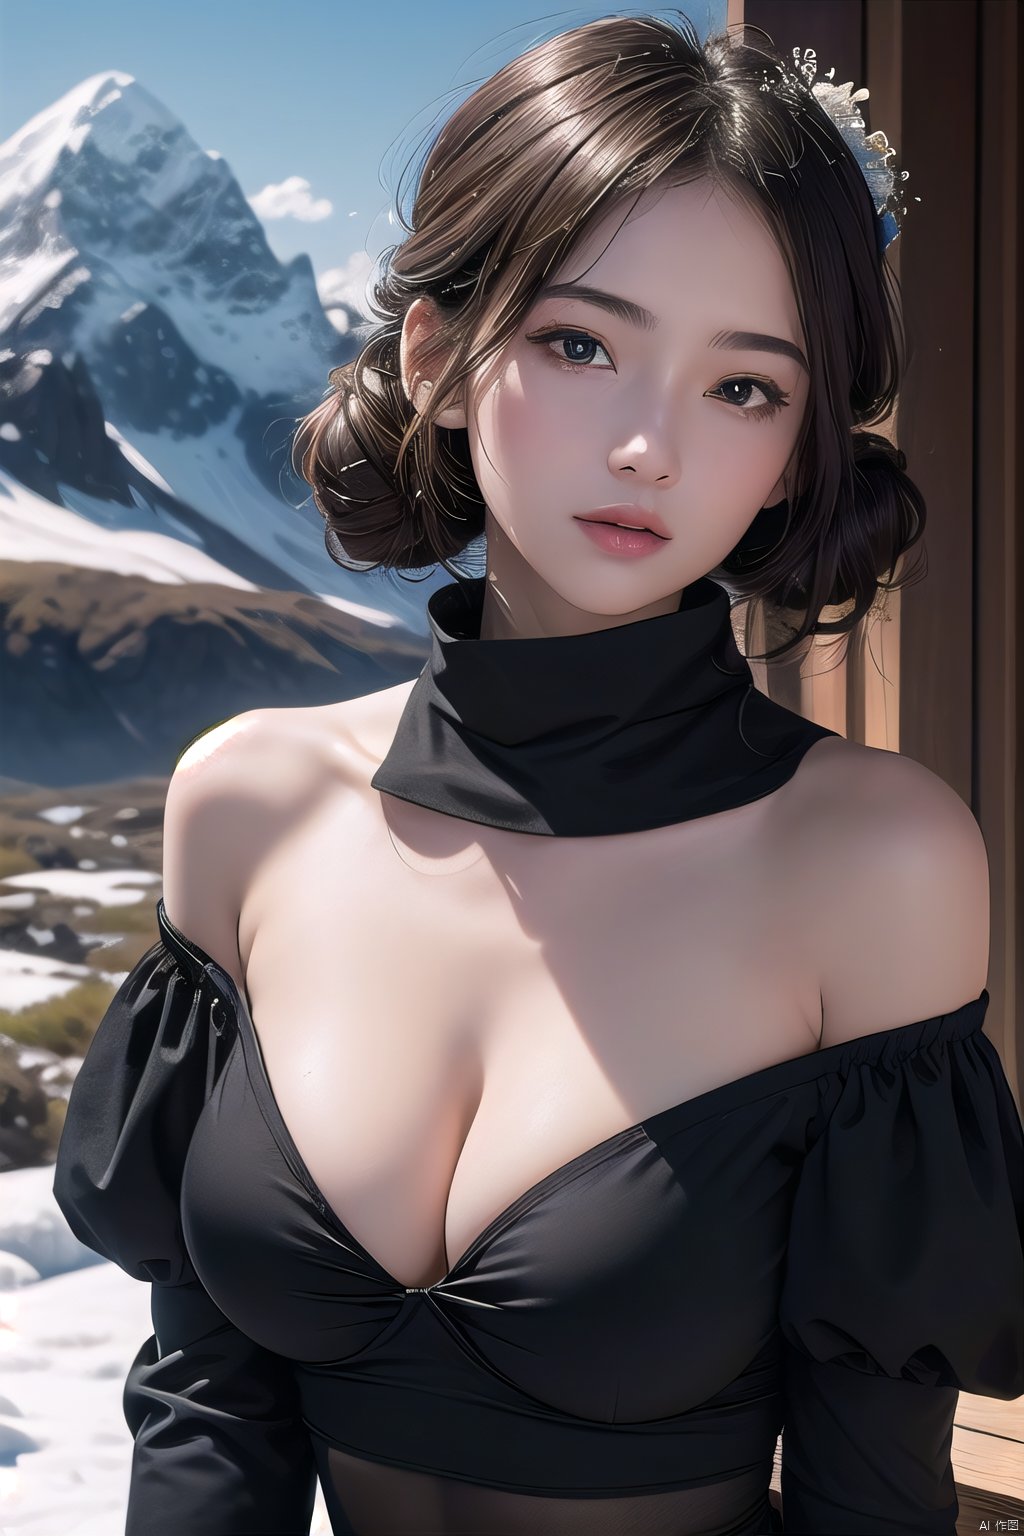  Best quality, ultra-high resolution, (photo realism: 1.4), 1 girl, black off shoulder shirt, enticing posture, separated sleeves, snowy mountain background, cleavage, plump, choked, huge breasts, messy bun, looking at the audience, soft lighting

